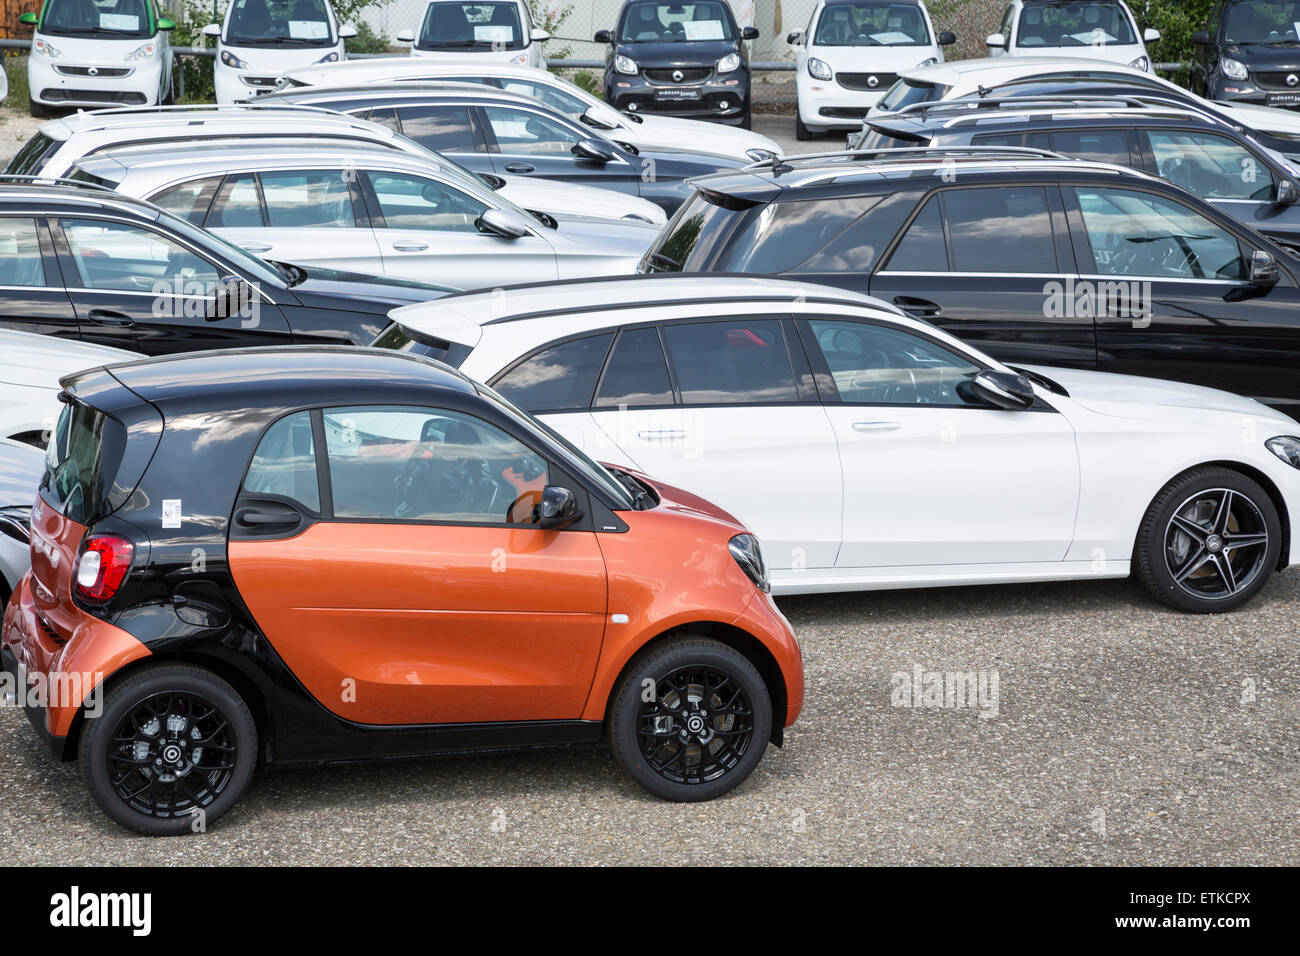 Smart standing on a dealership lot Stock Photo